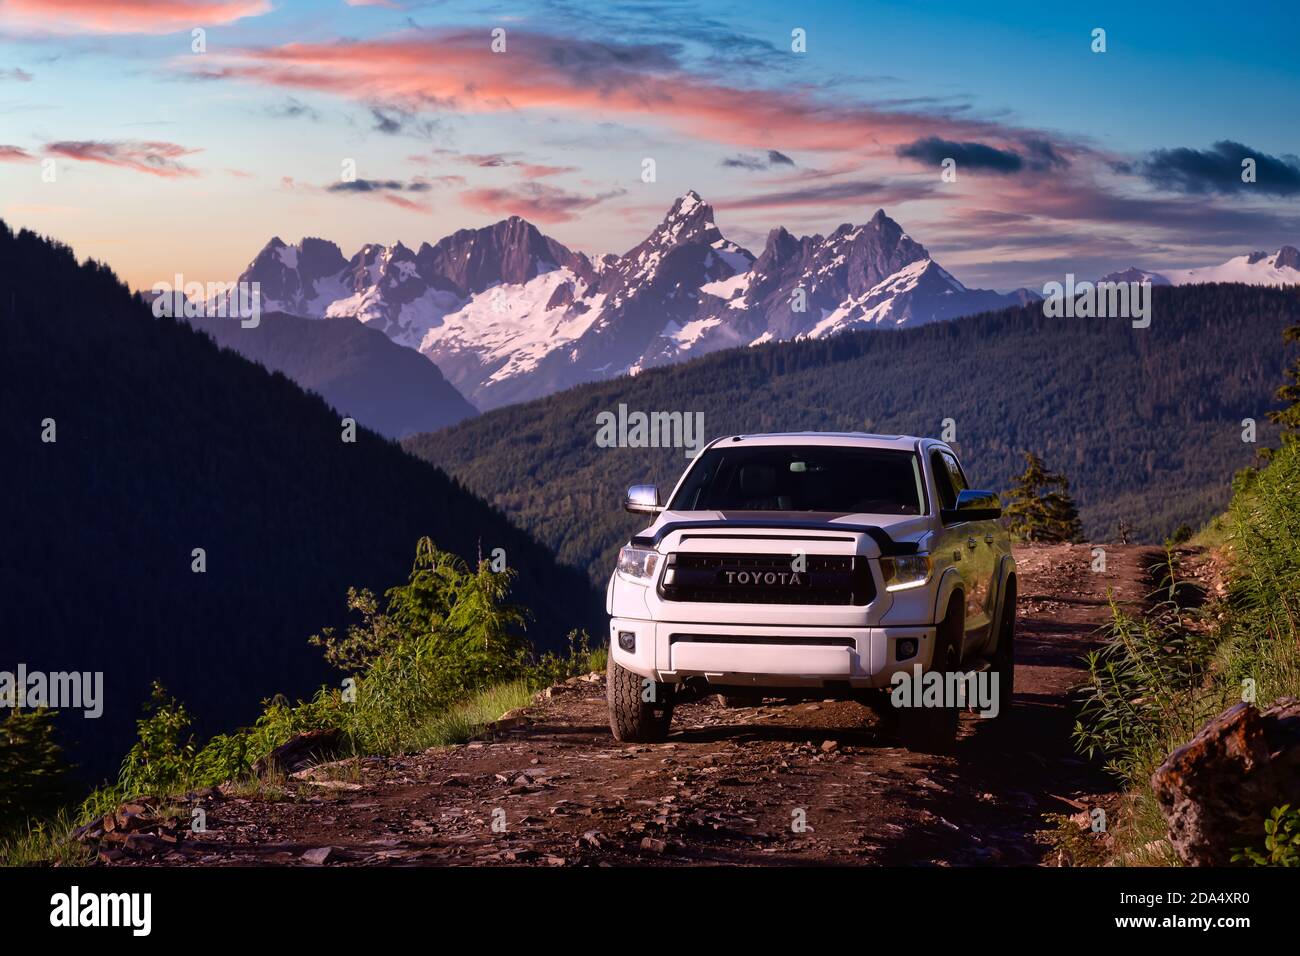 Toyota Tacoma riding on the 4x4 Offroad Trails in the mountains Stock Photo